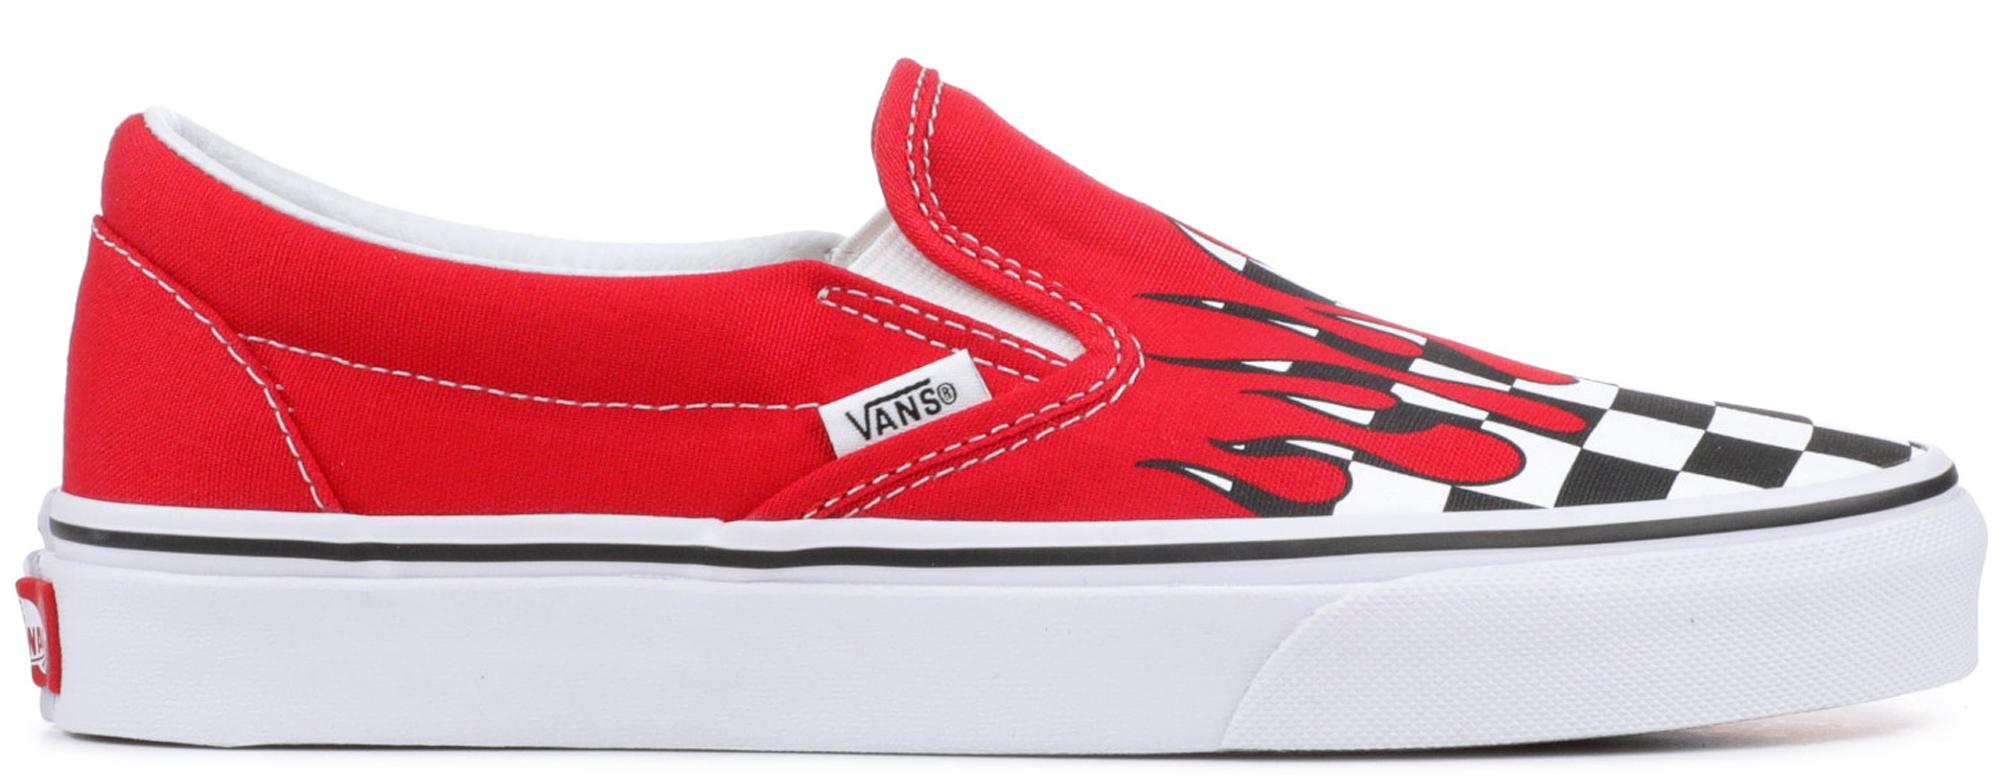 Vans Slip-on Checkerboard Flame Red for Men - Save 54% - Lyst